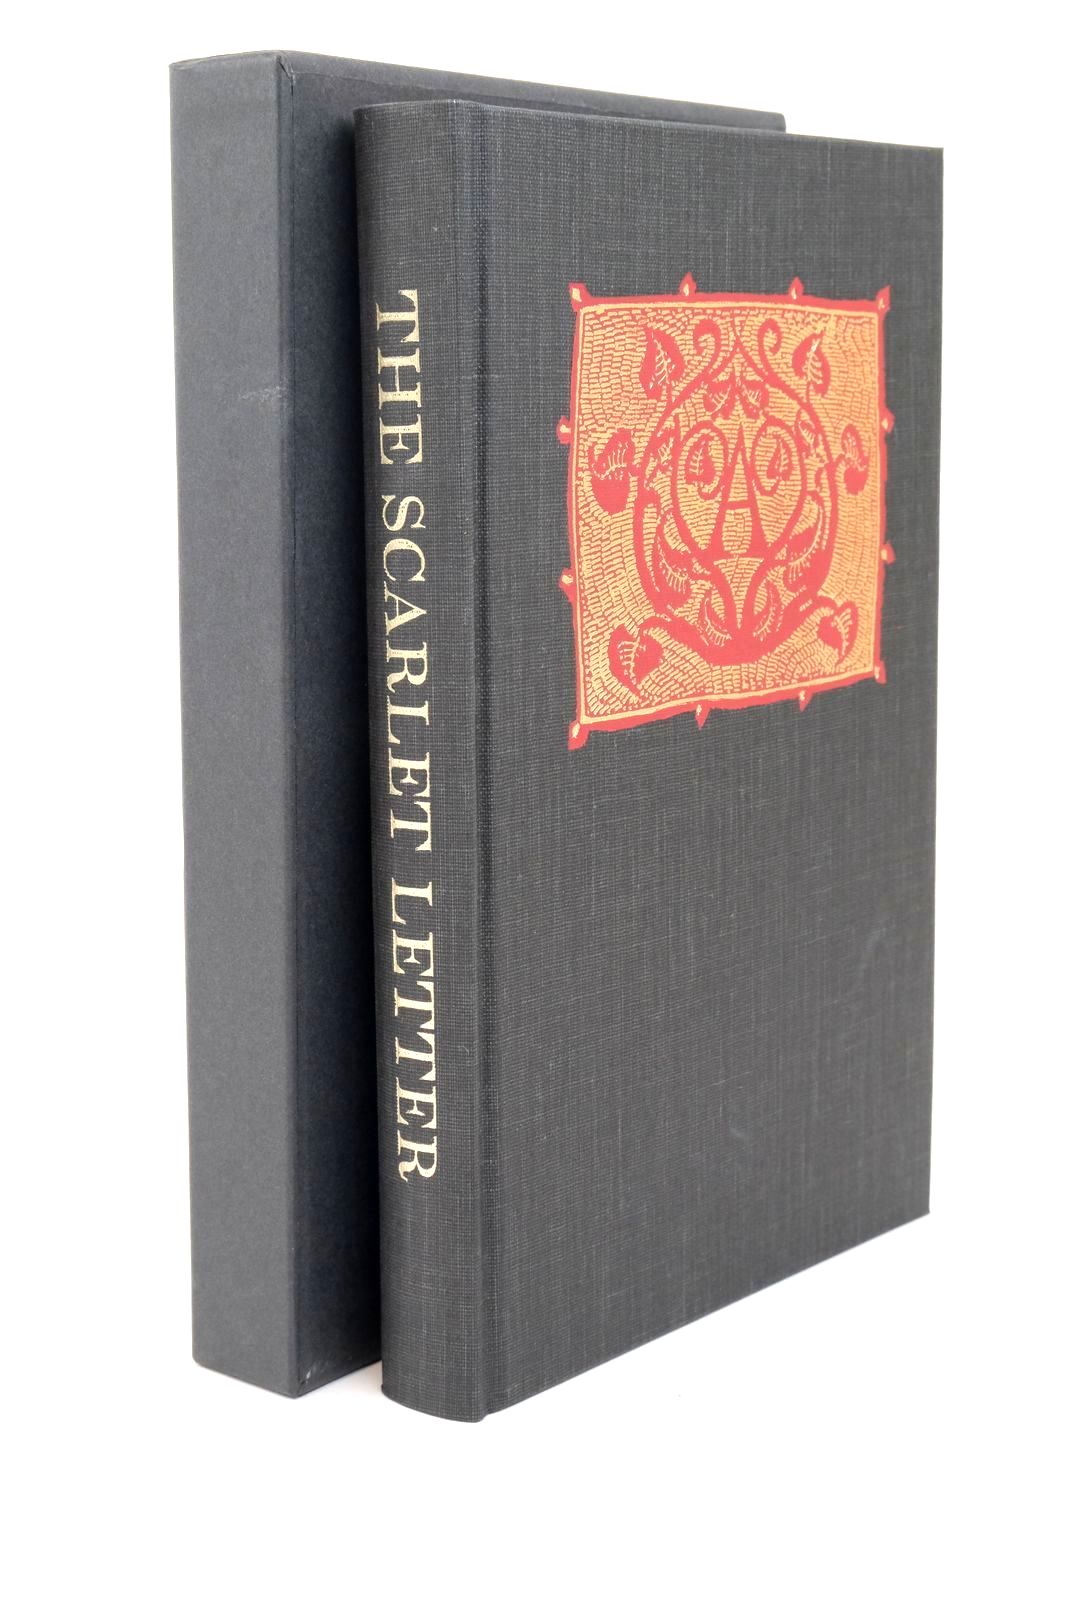 Photo of THE SCARLET LETTER written by Hawthorne, Nathaniel published by Folio Society (STOCK CODE: 1322873)  for sale by Stella & Rose's Books